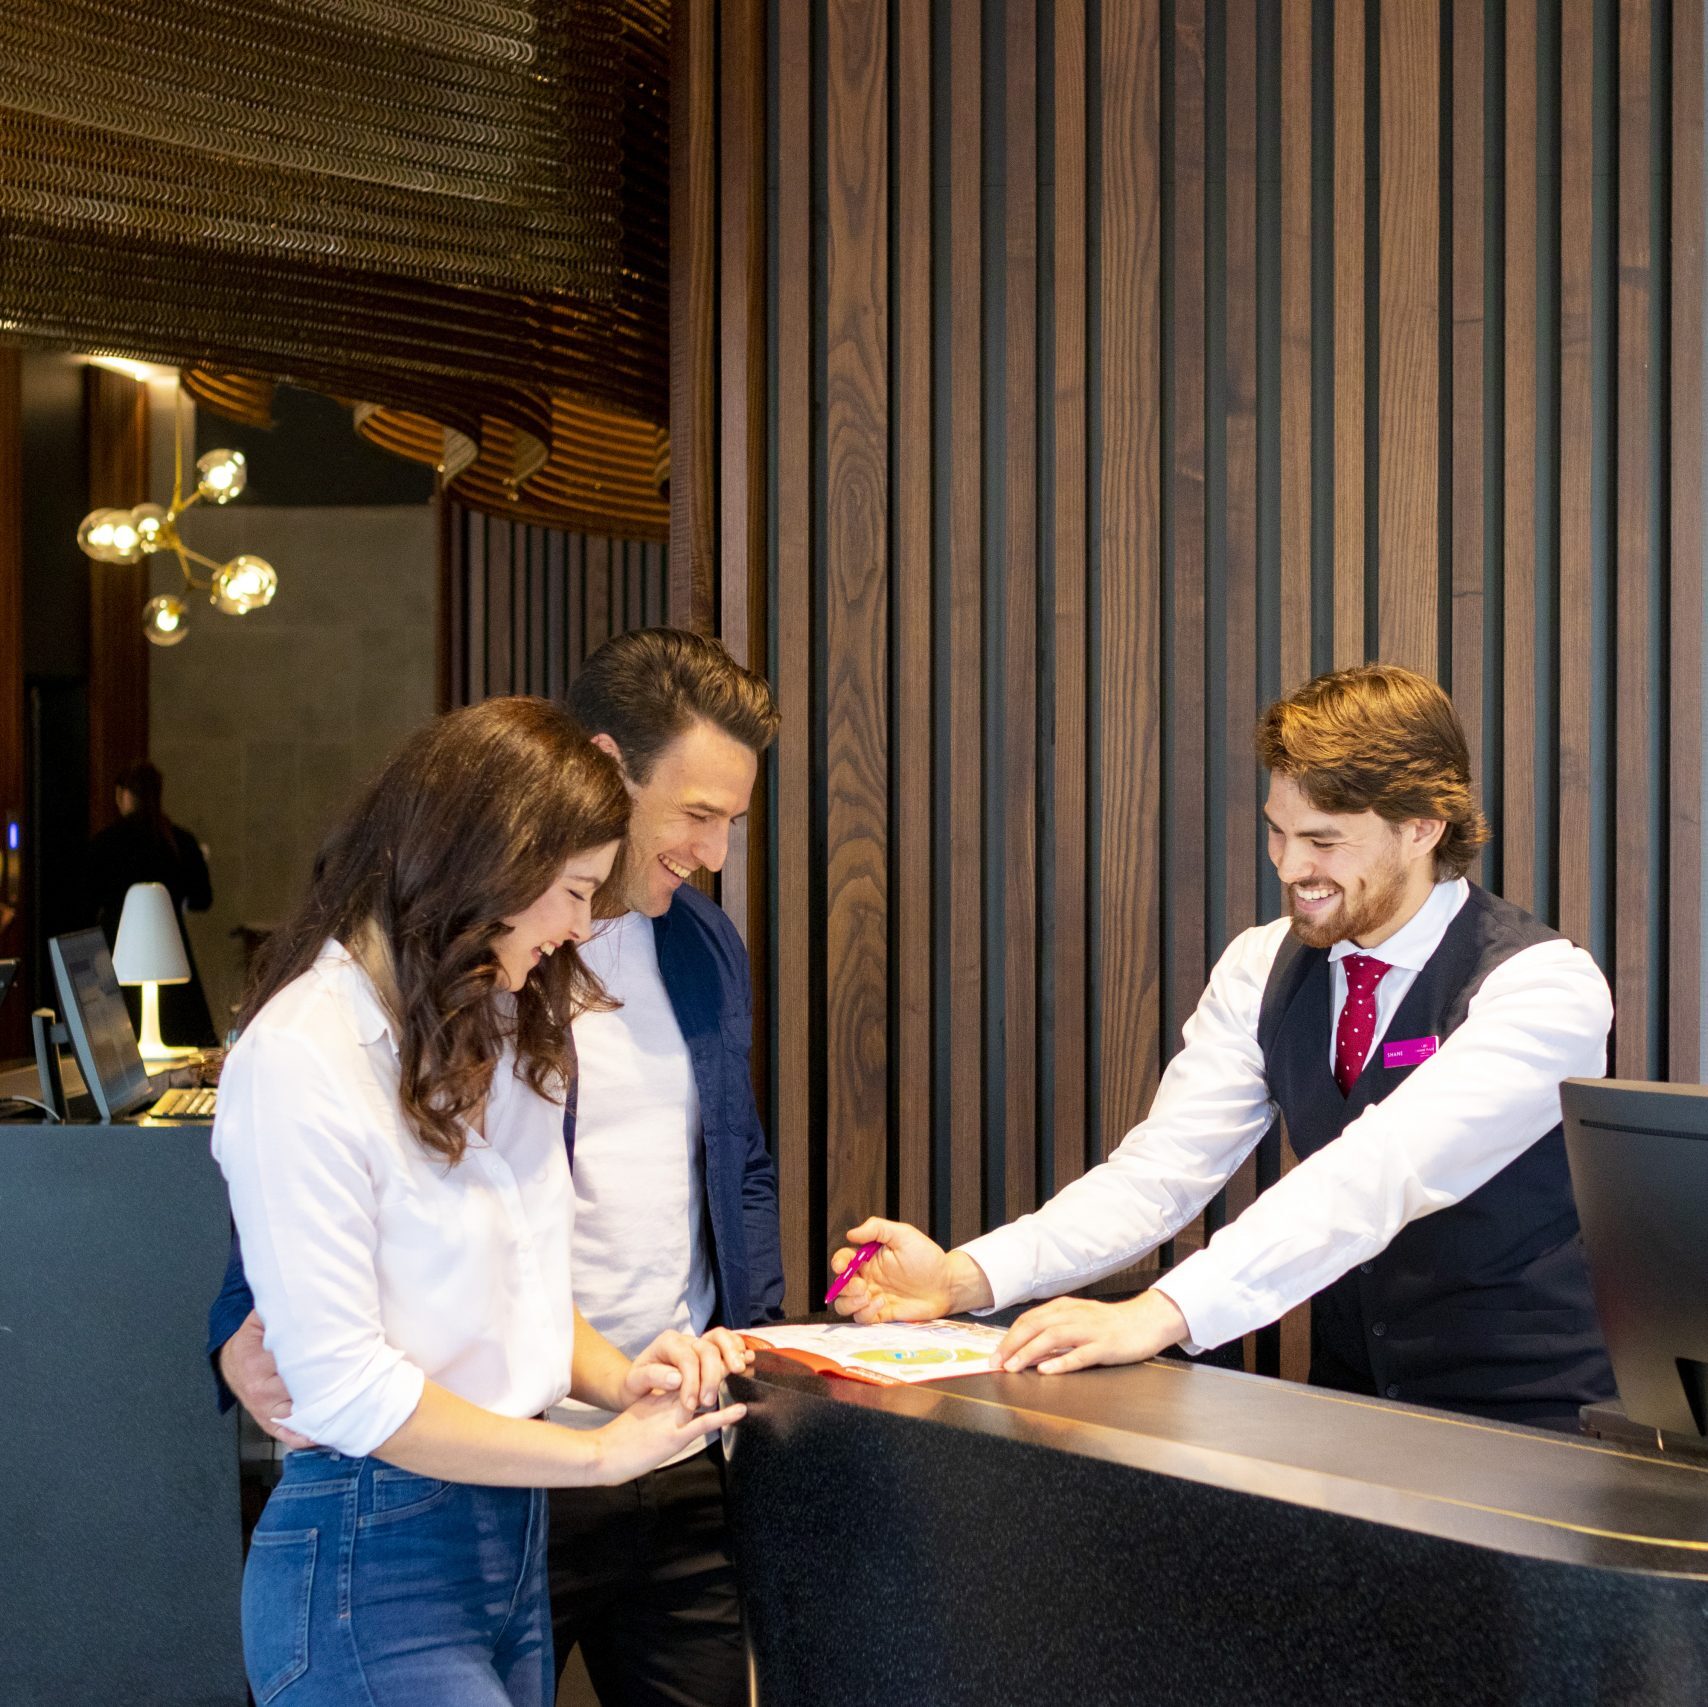 Friendly Concierge and couple at Crowne Plaza Christchurch Hotel Lobby & Reception